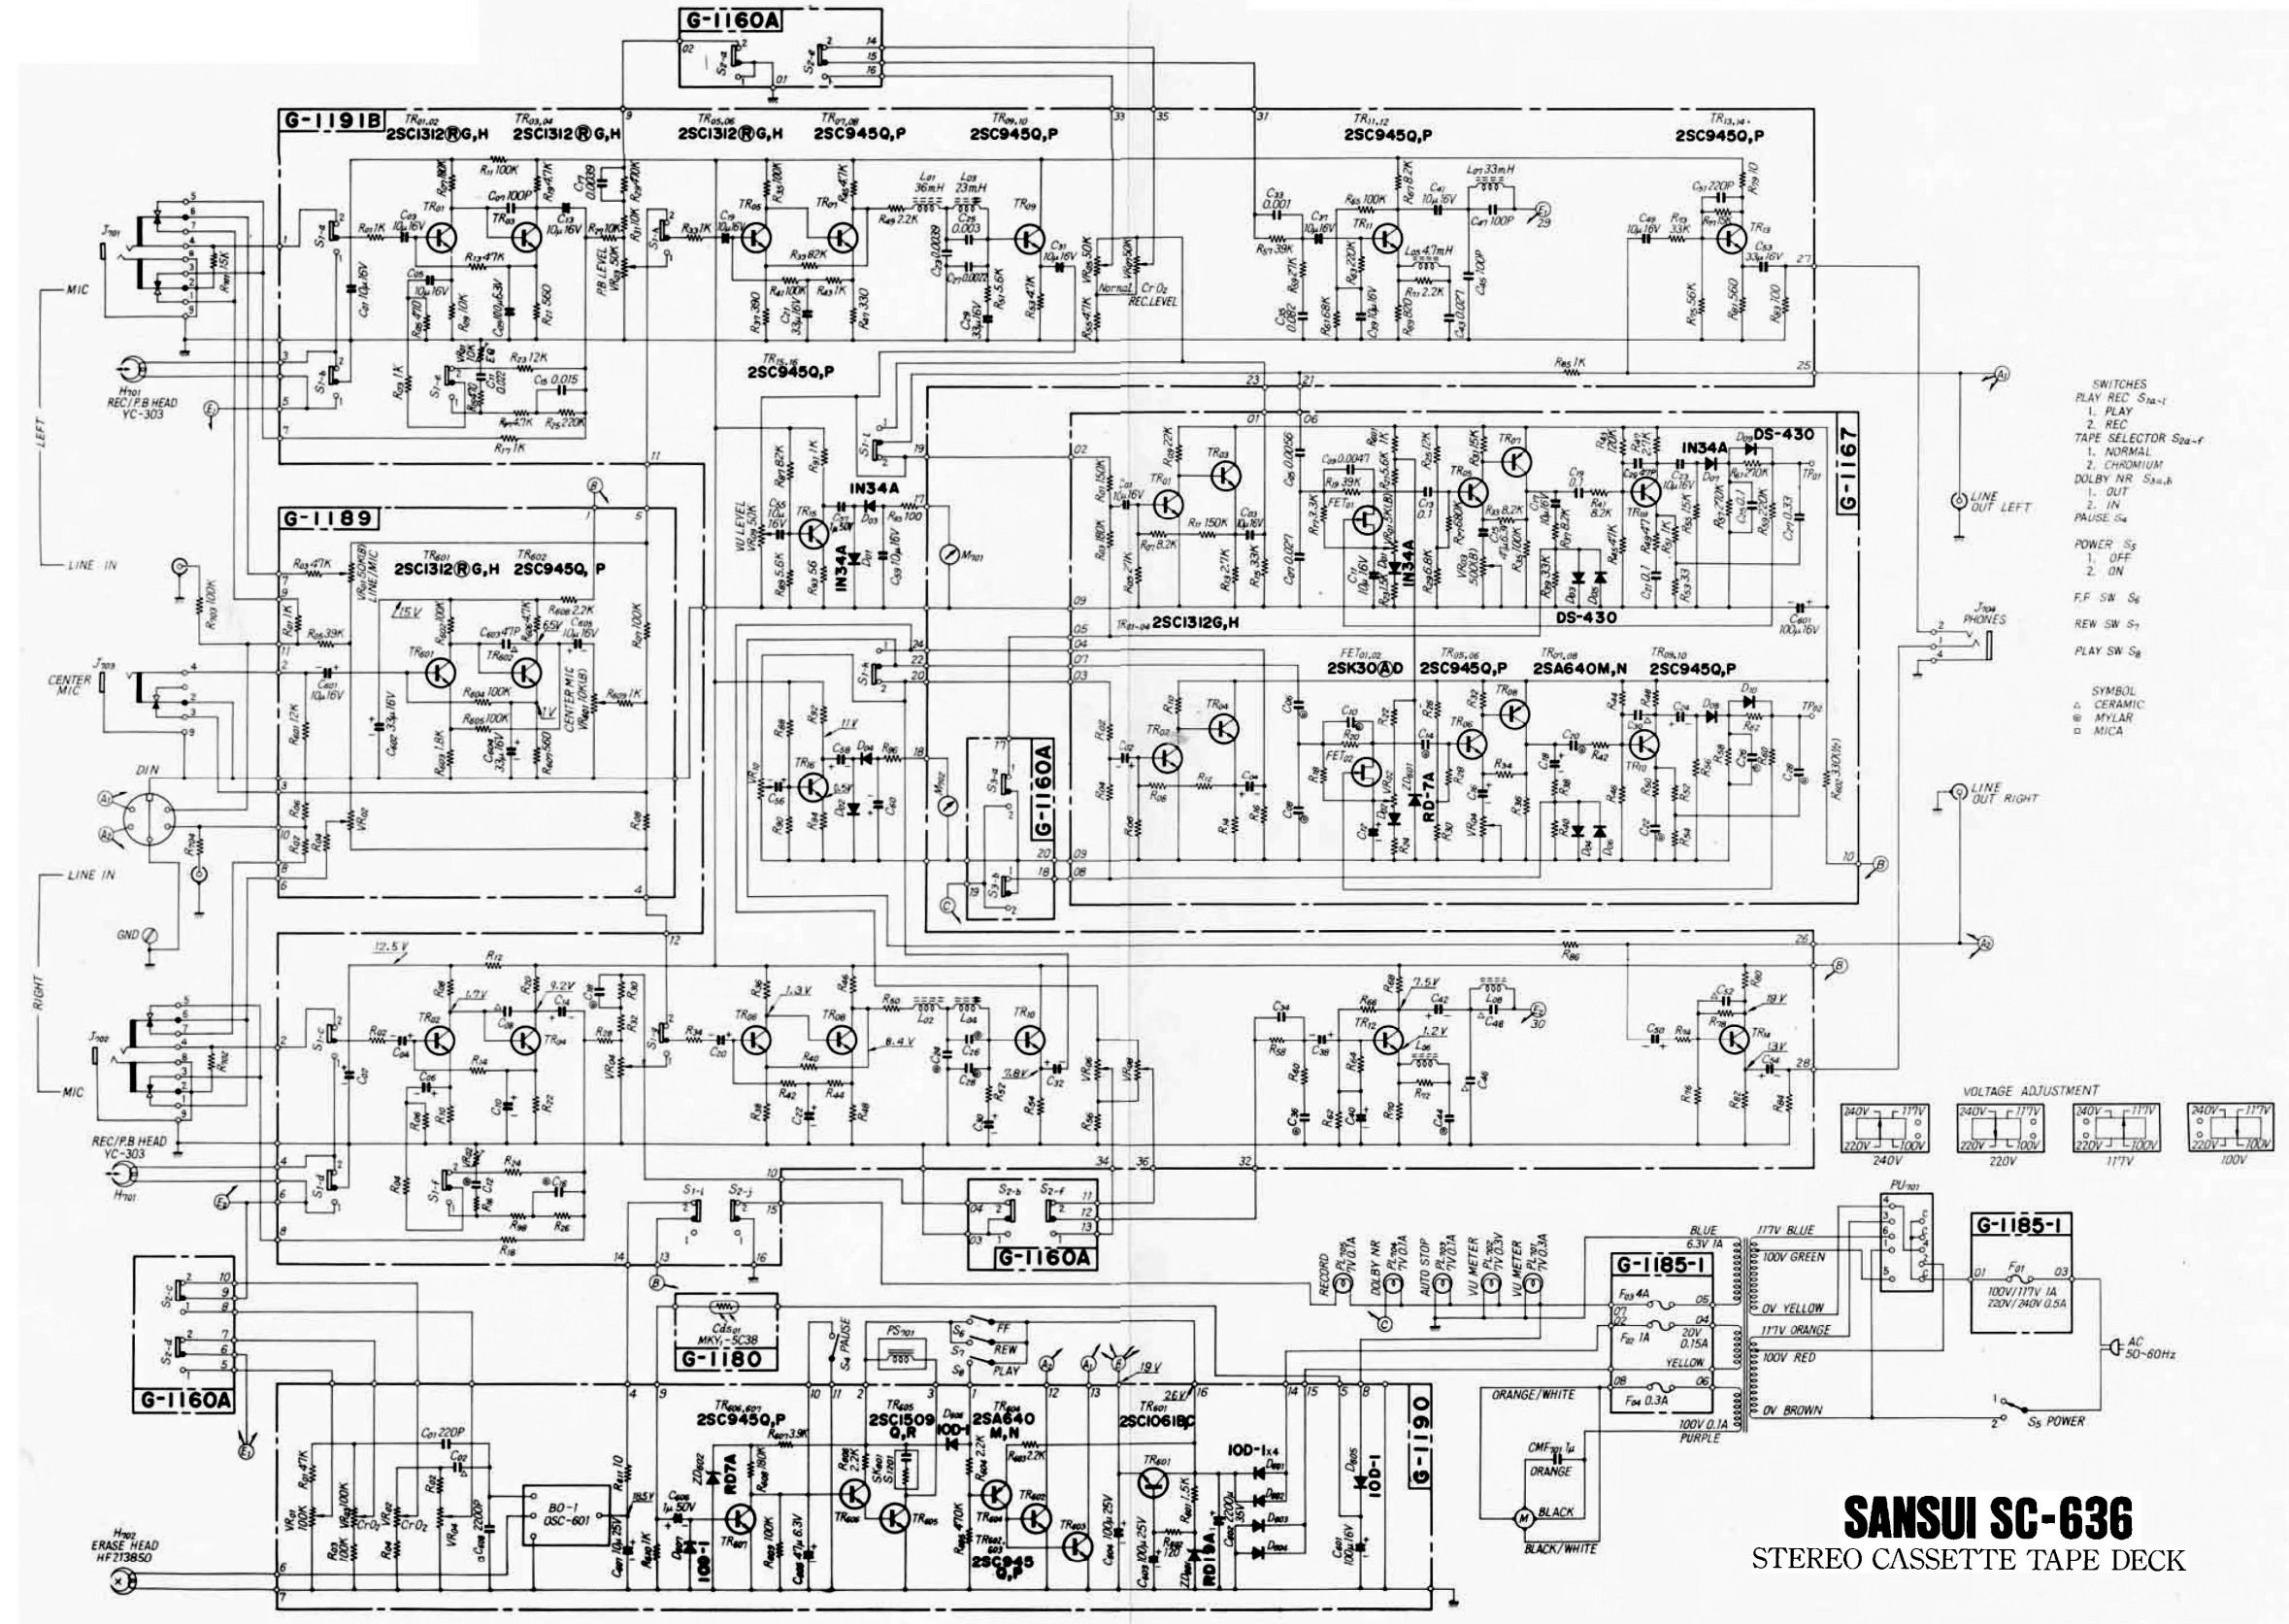 Schematic Diagrams: Sansui SC 636 and Hbuster HBD4100, SCD3150 car